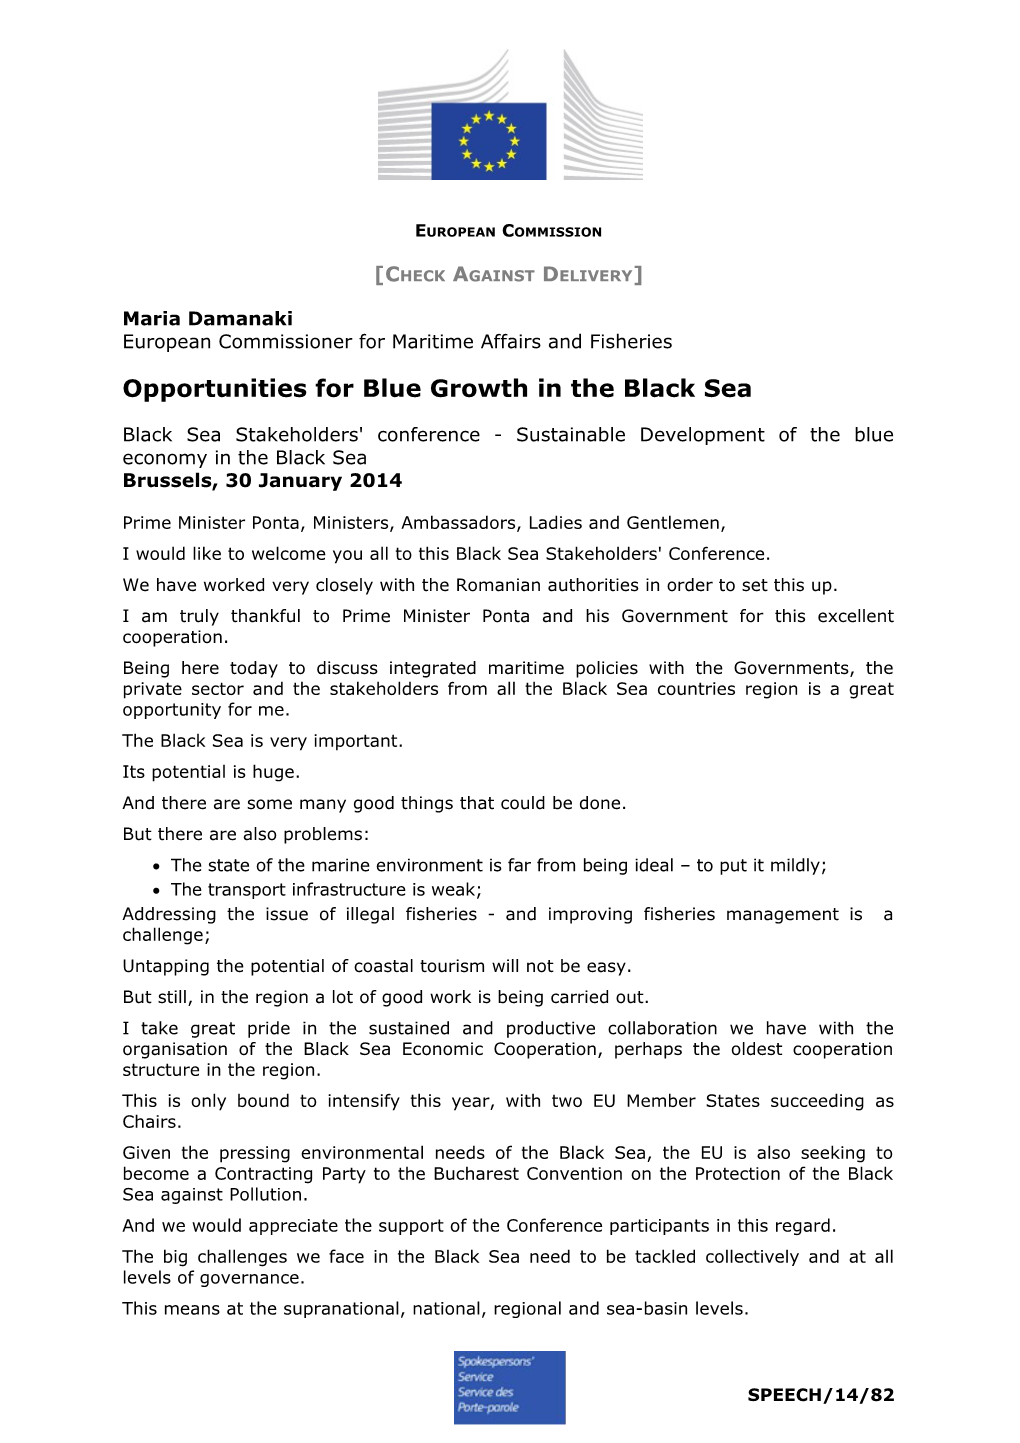 Opportunities for Blue Growth in the Black Sea